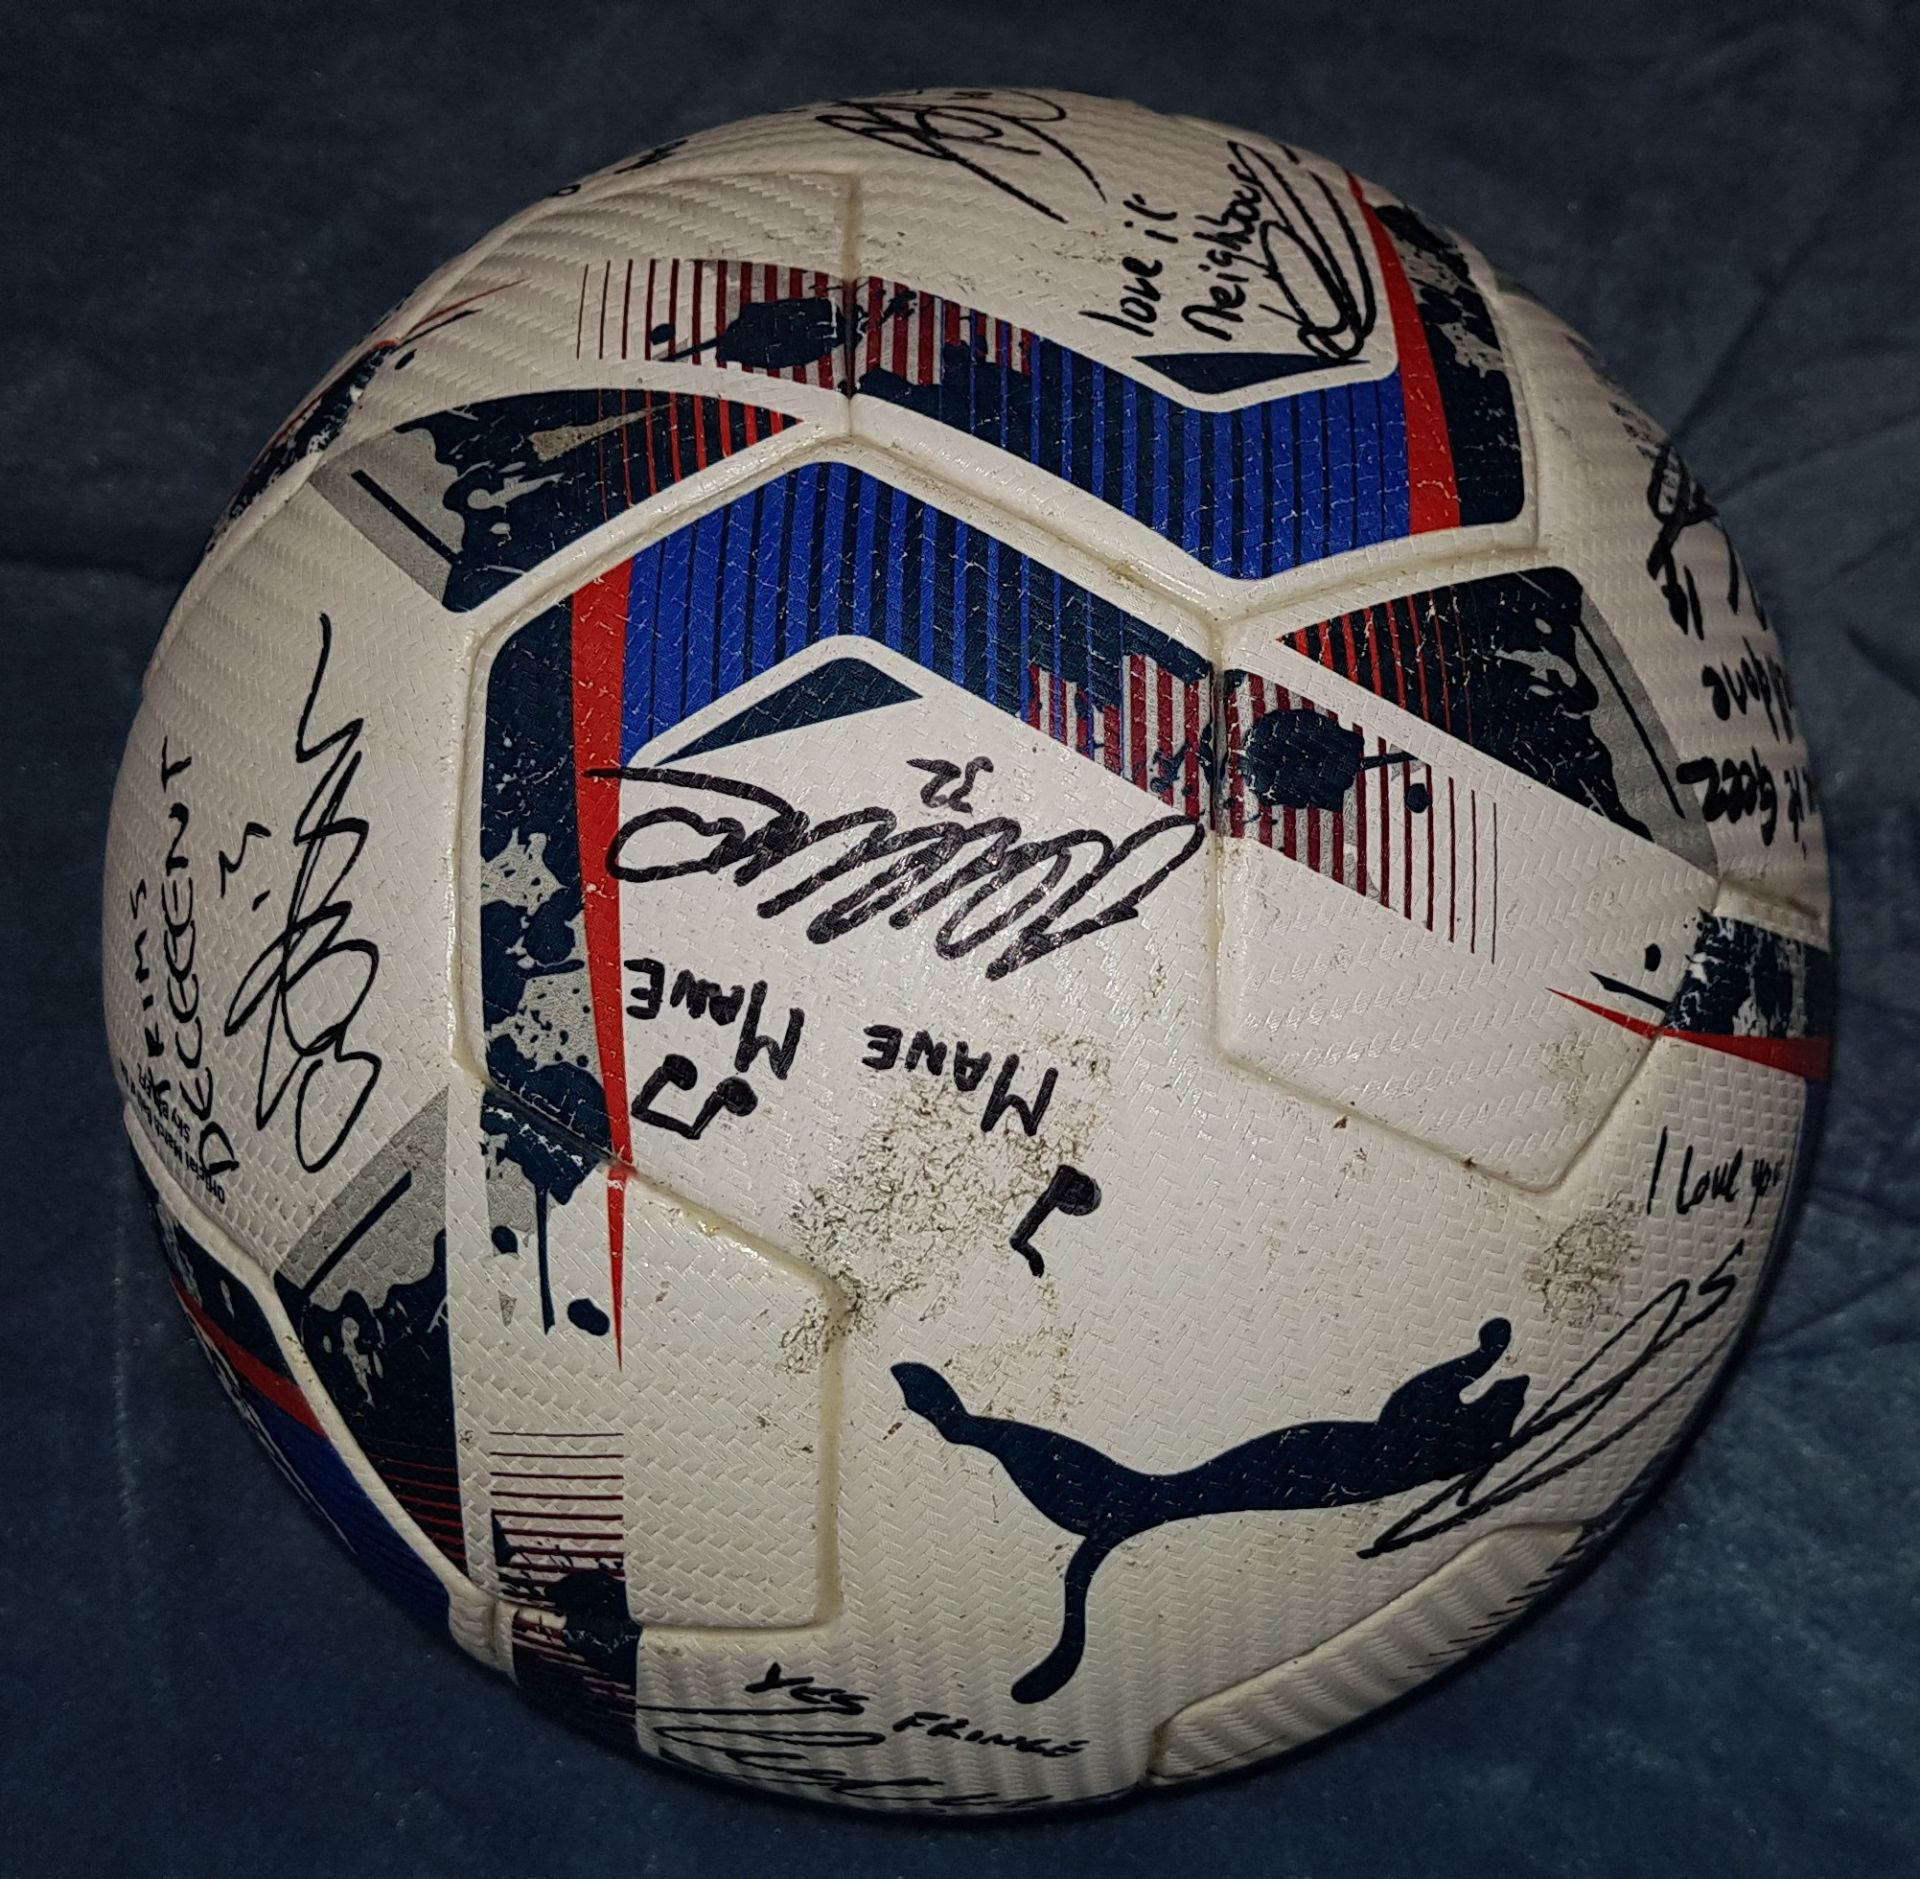 PUMA SIZE 5 FOOTBALL FIFA QUALITY PRO SKYBET EFL WITH NUMEROUS UNKNOWN SIGNATURES (SEE IMAGES) - Image 2 of 4